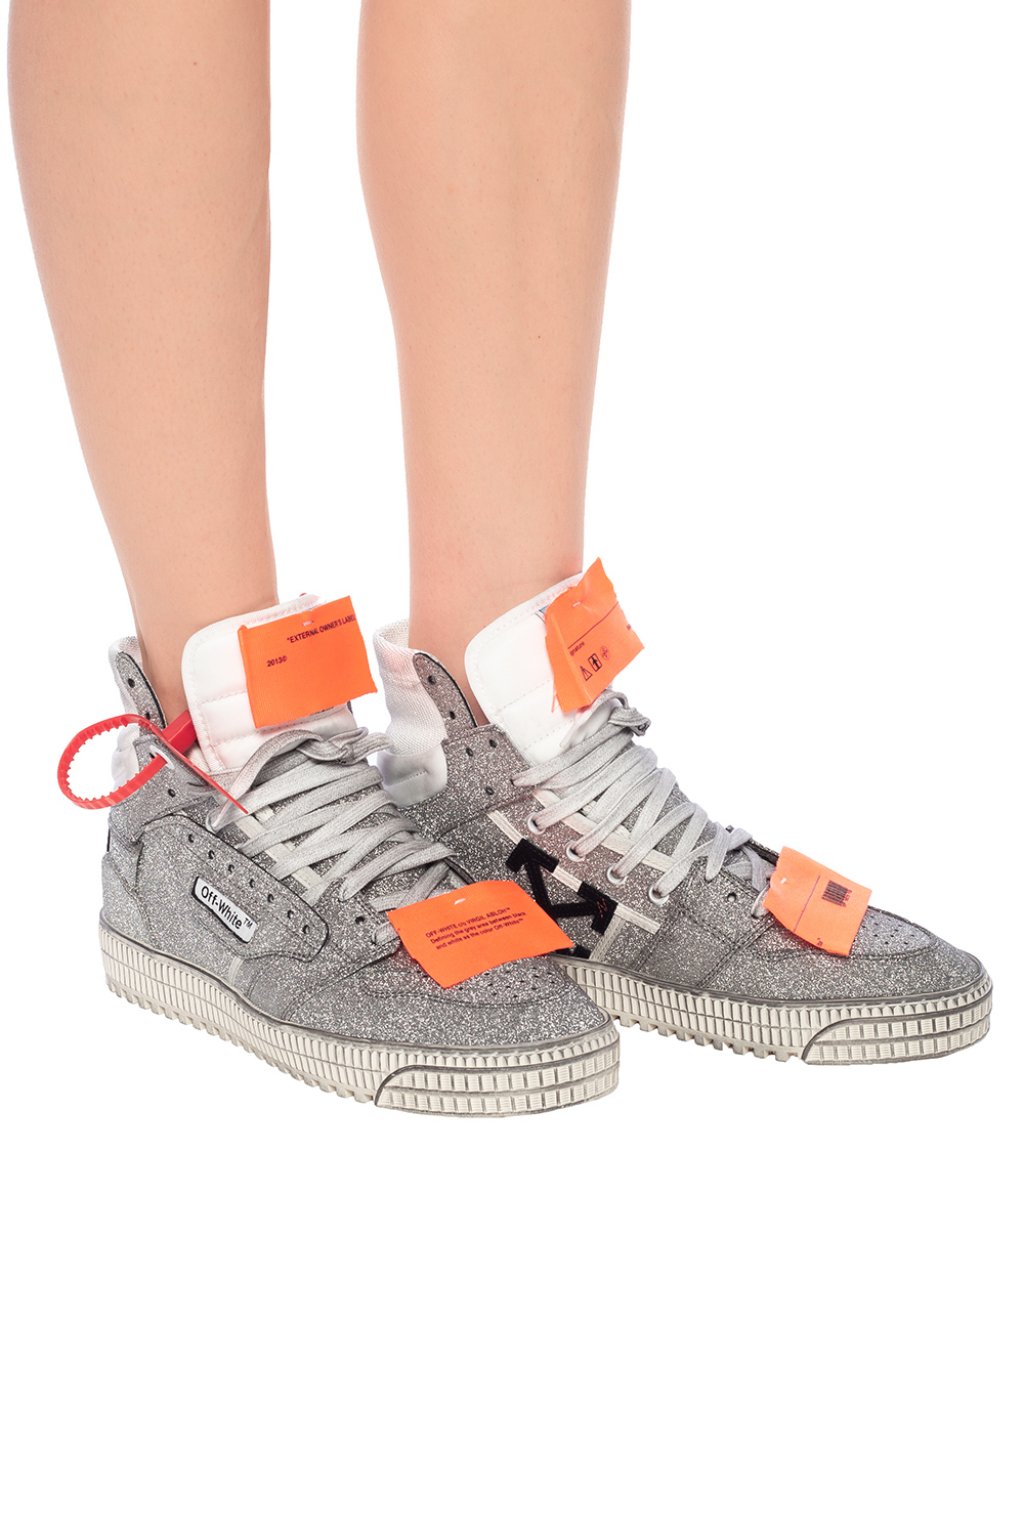 off white sneakers glitter